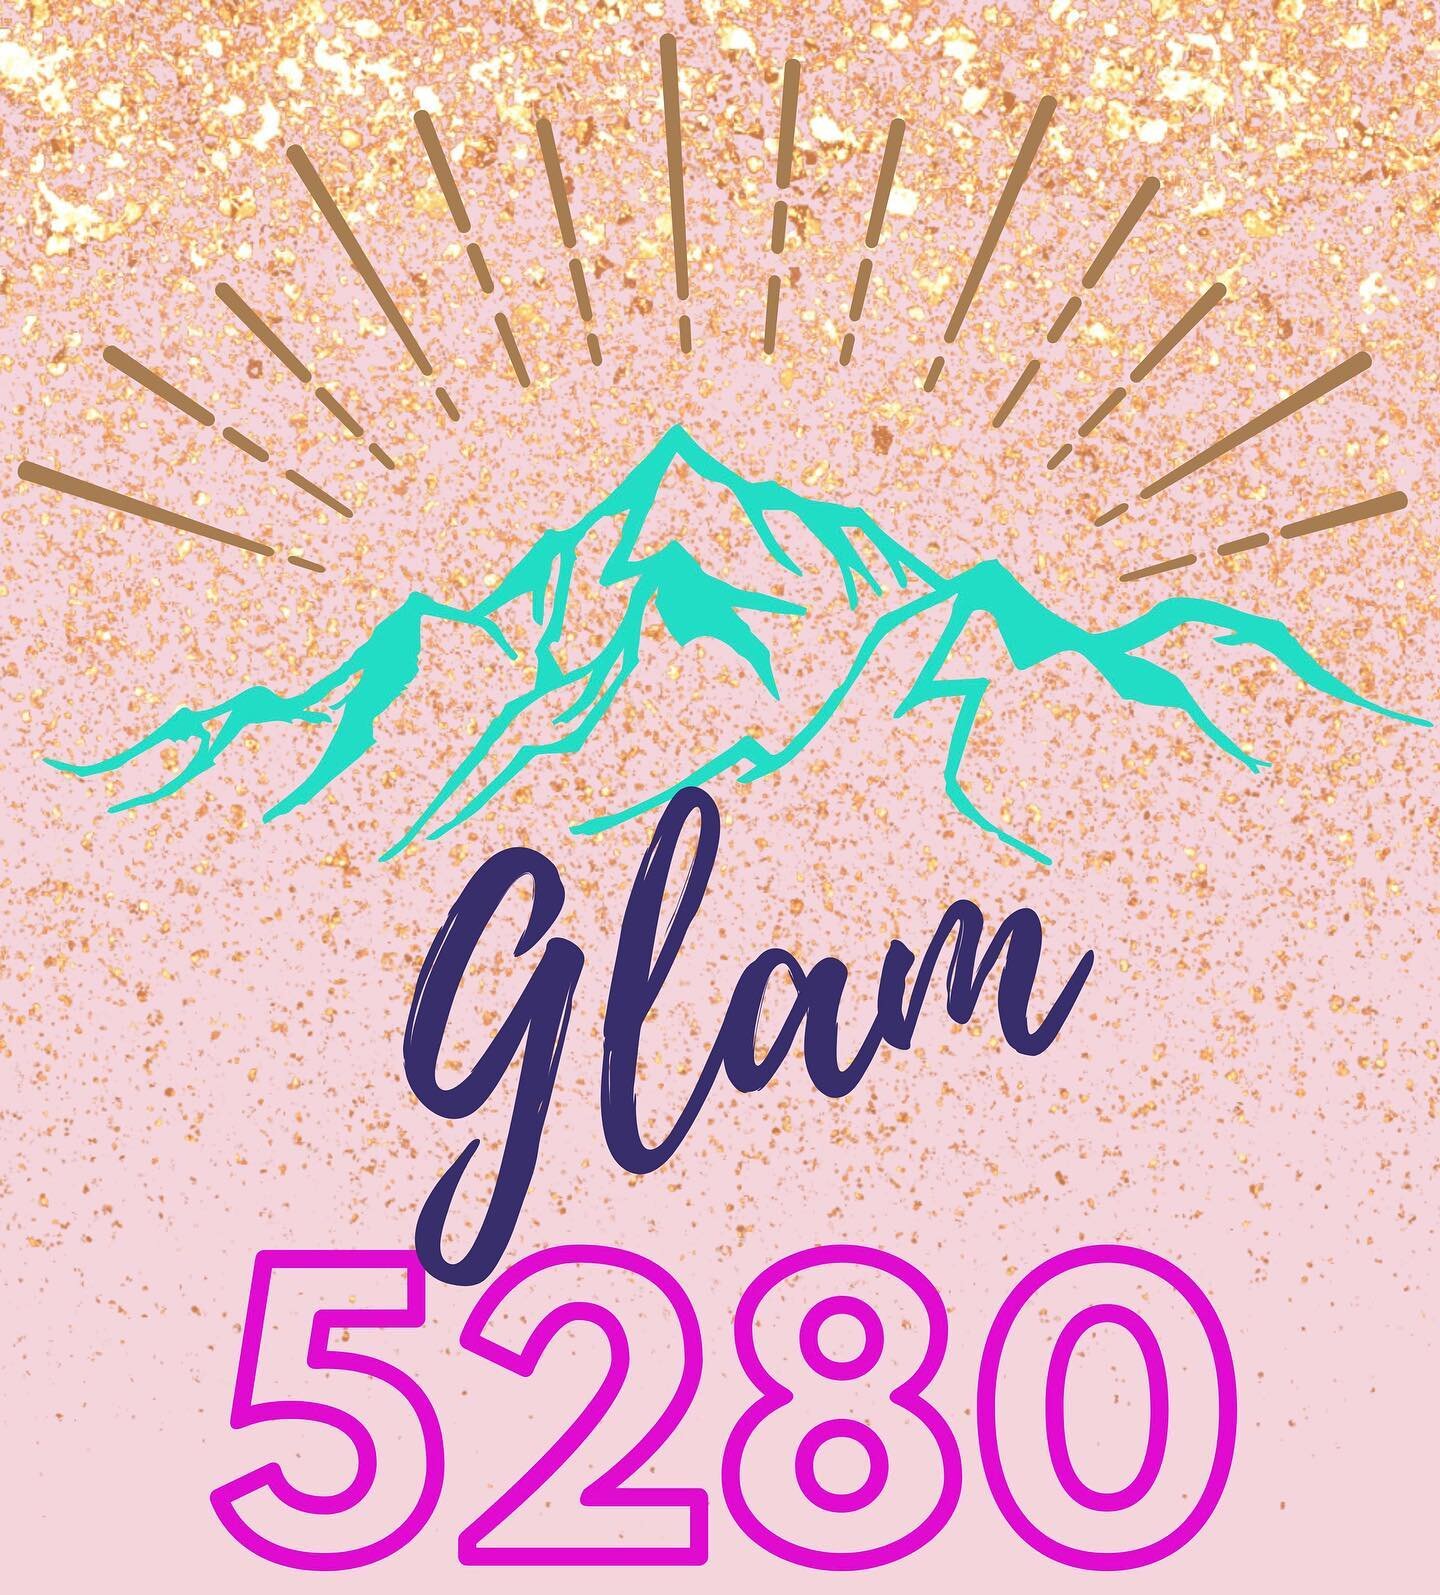 2023 is filling up quick! Fill out our inquiry form now to see if we still have your date available! www.glam5280.com/contact